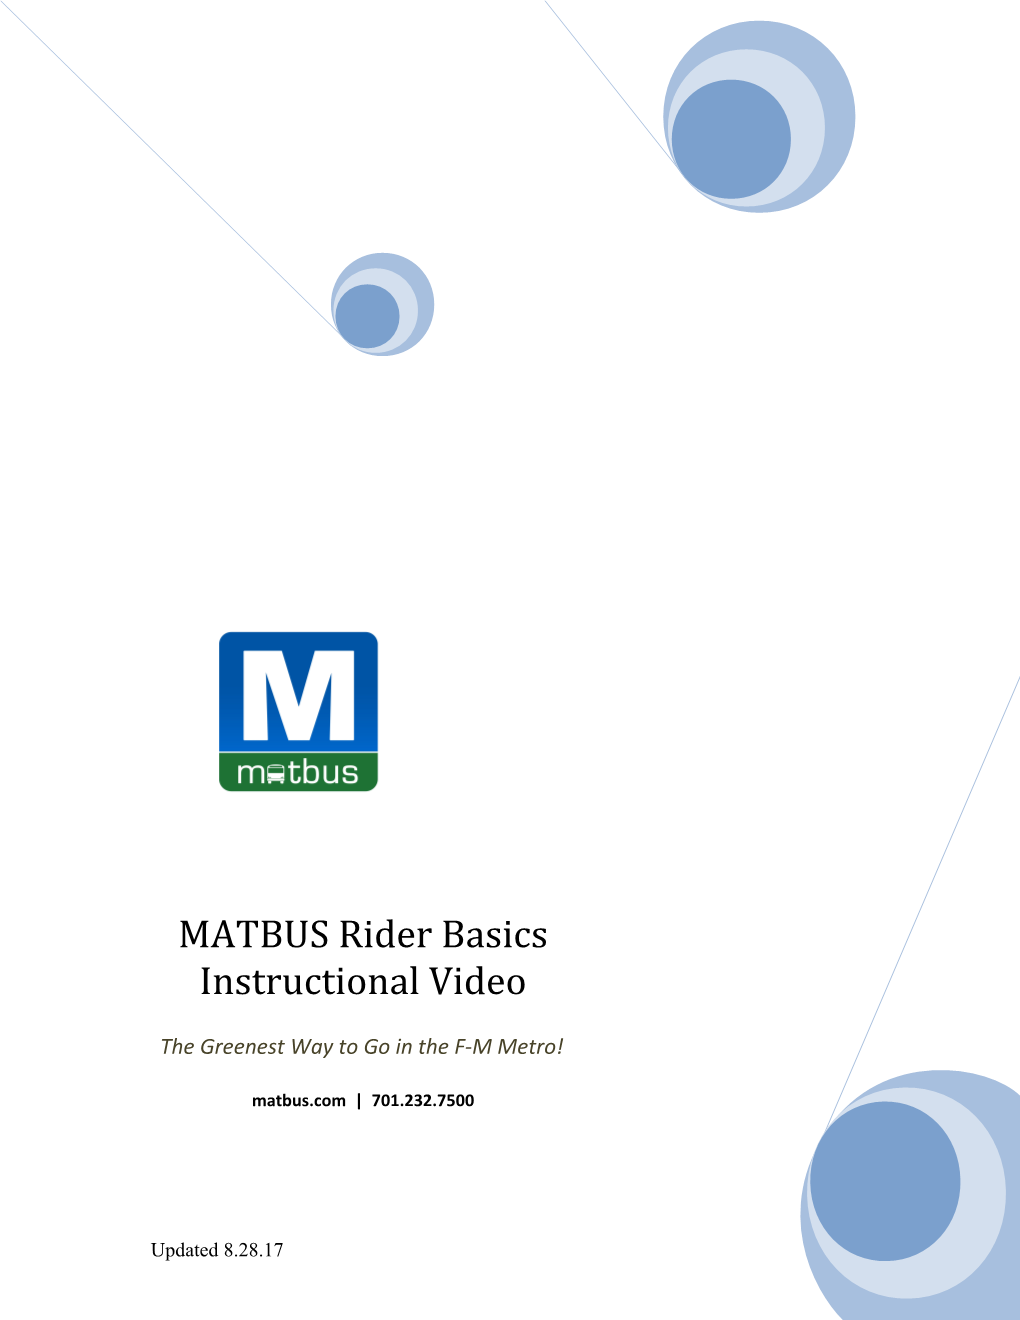 MATBUS Presents Its How to Ride Instructional Video